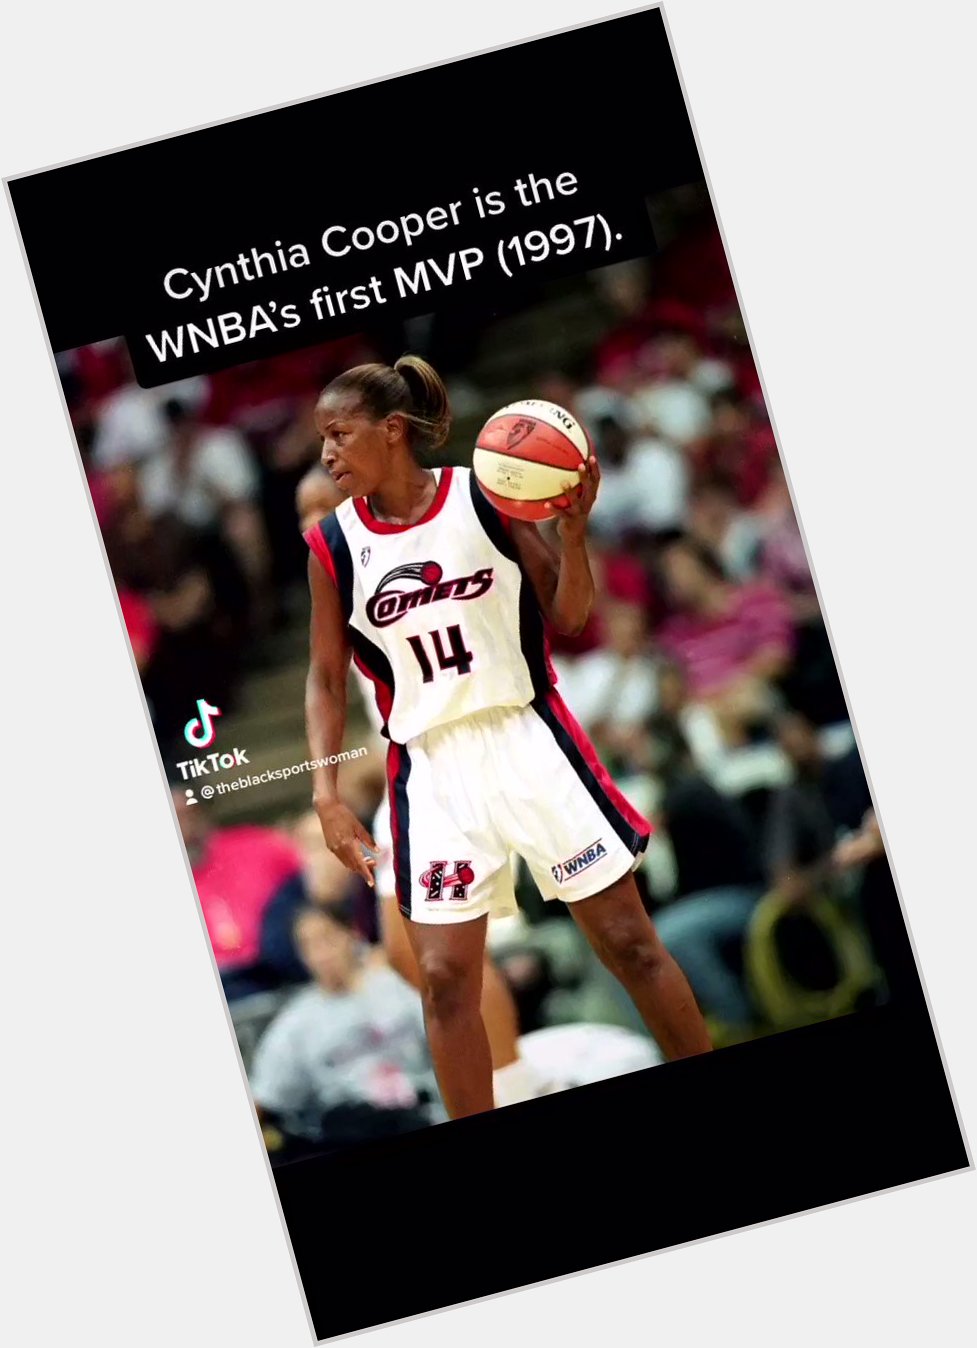 How many can say they have a resume like Cynthia Cooper? Also, happy belated birthday 